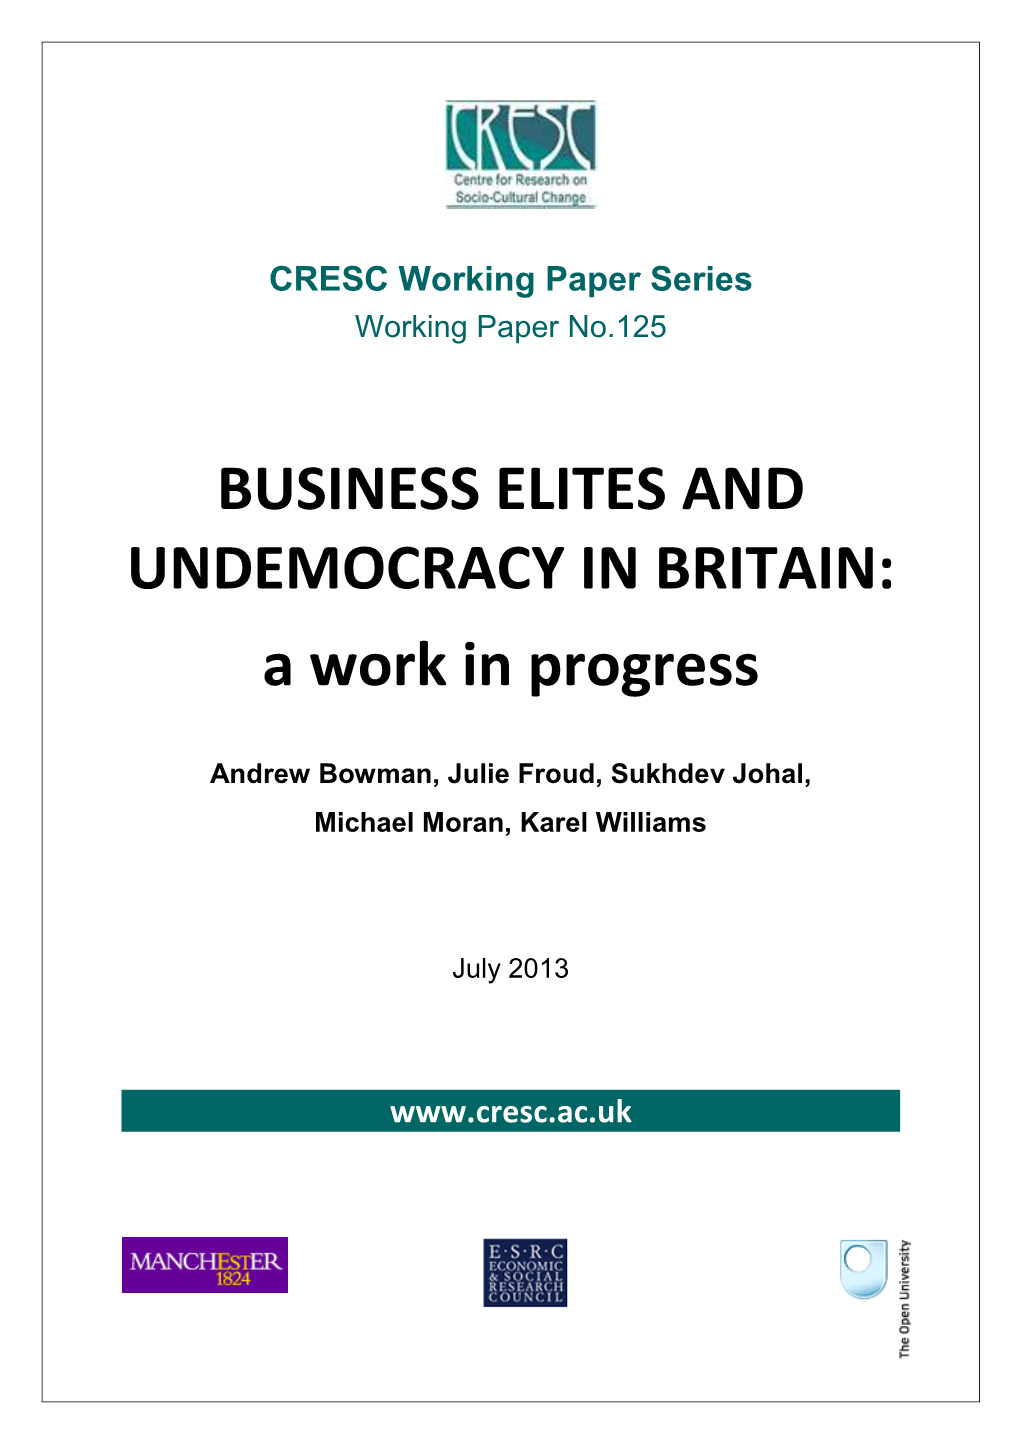 BUSINESS ELITES and UNDEMOCRACY in BRITAIN: a Work in Progress